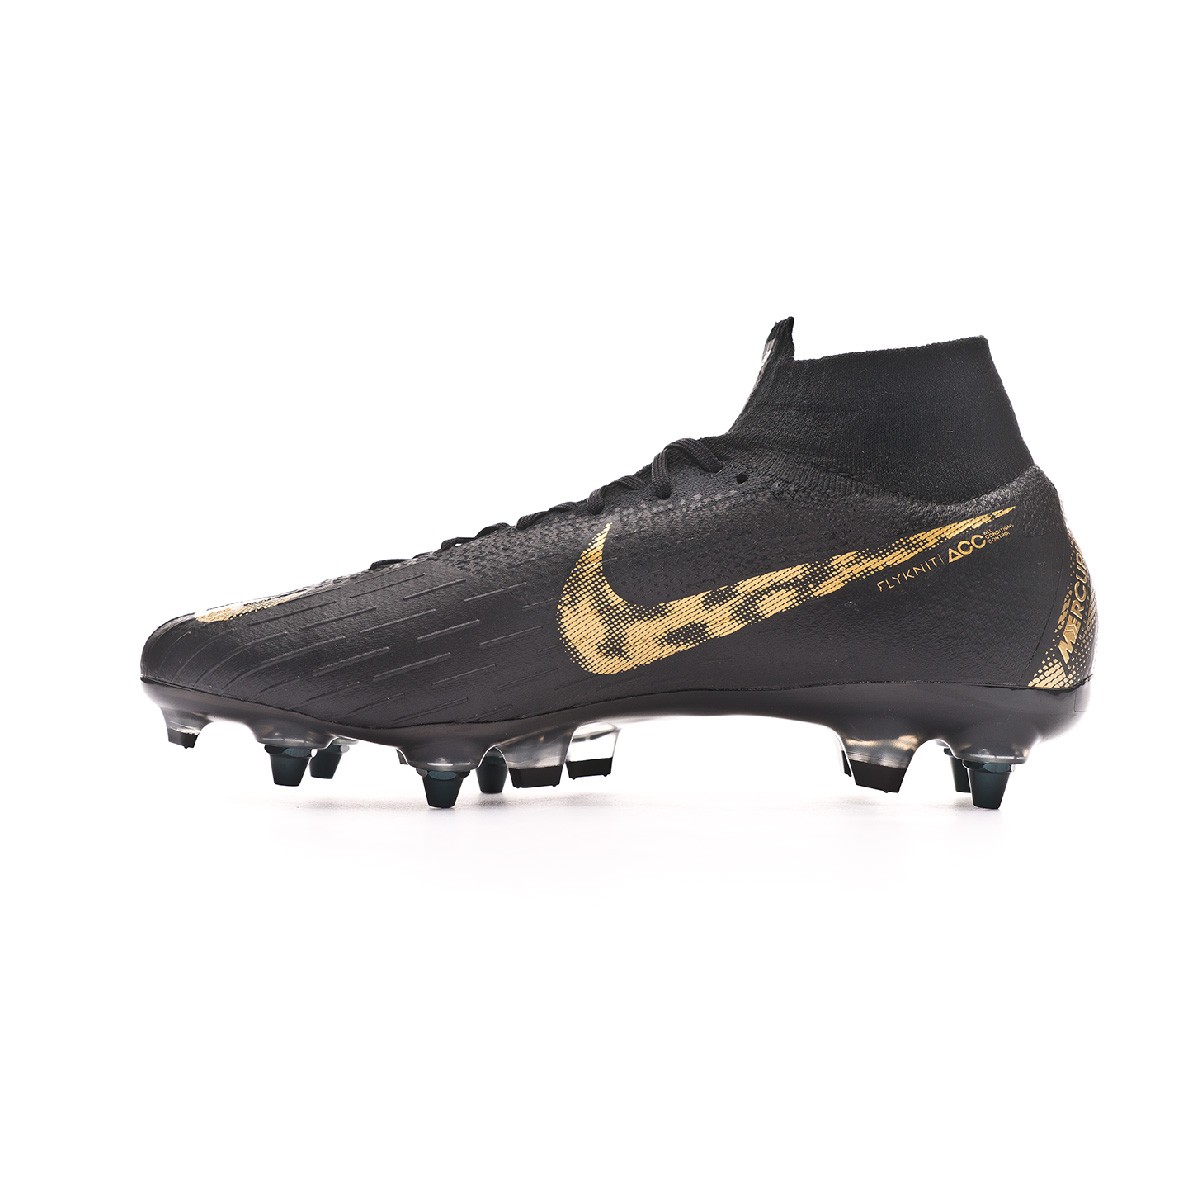 Nike Mercurial Superfly VI Products online Shop Outlet.